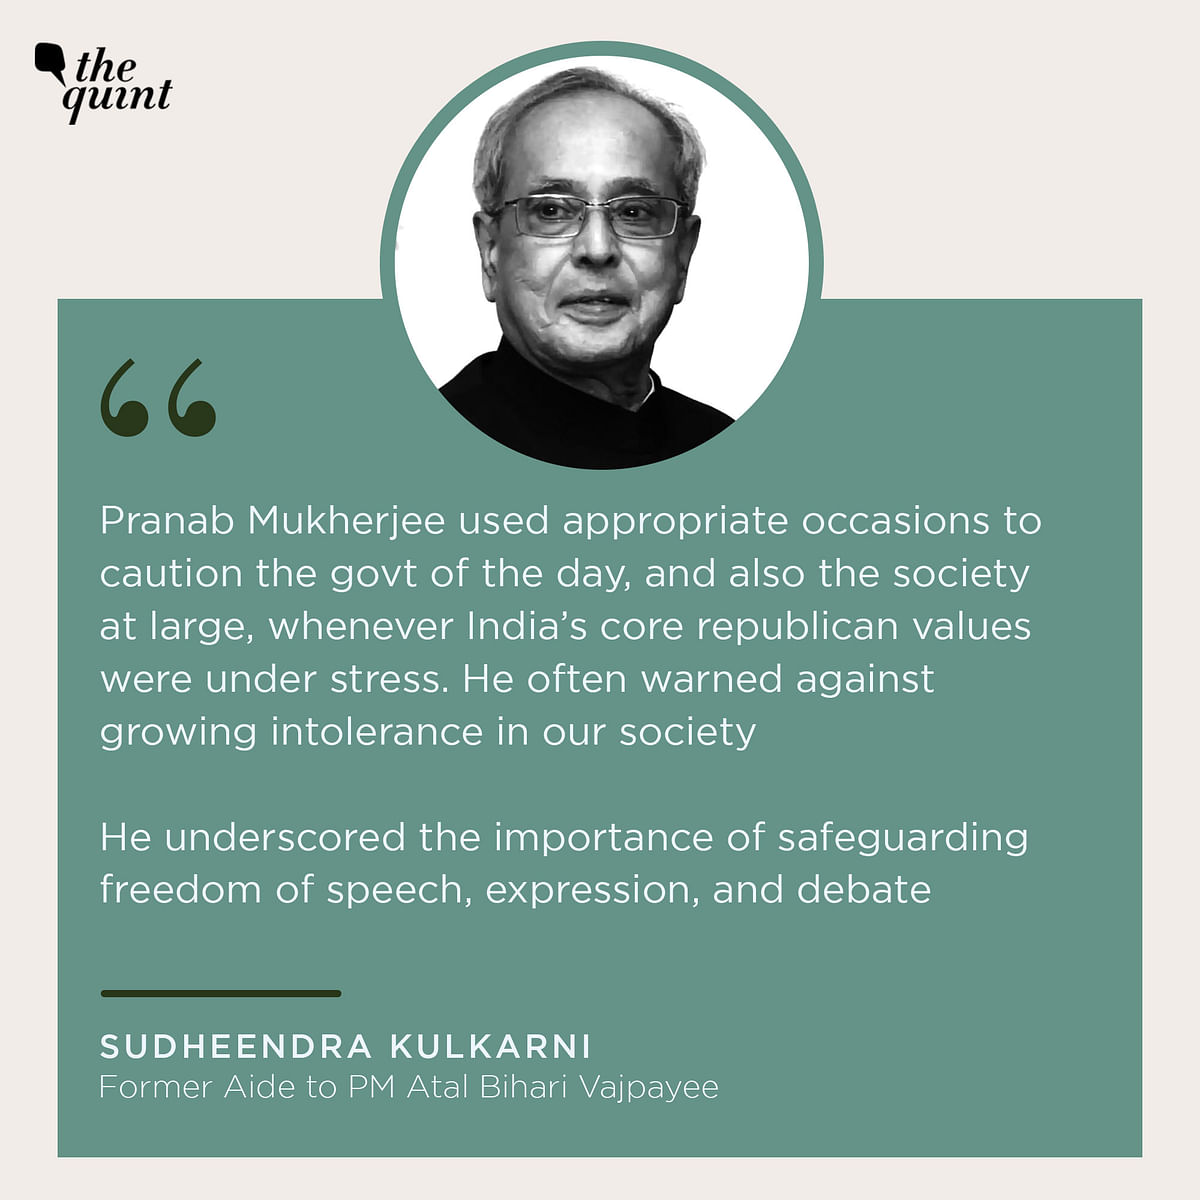 Pranab Mukherjee defended ‘secularism’ as one of the foundational pillars of Indian civilisation and Constitution.